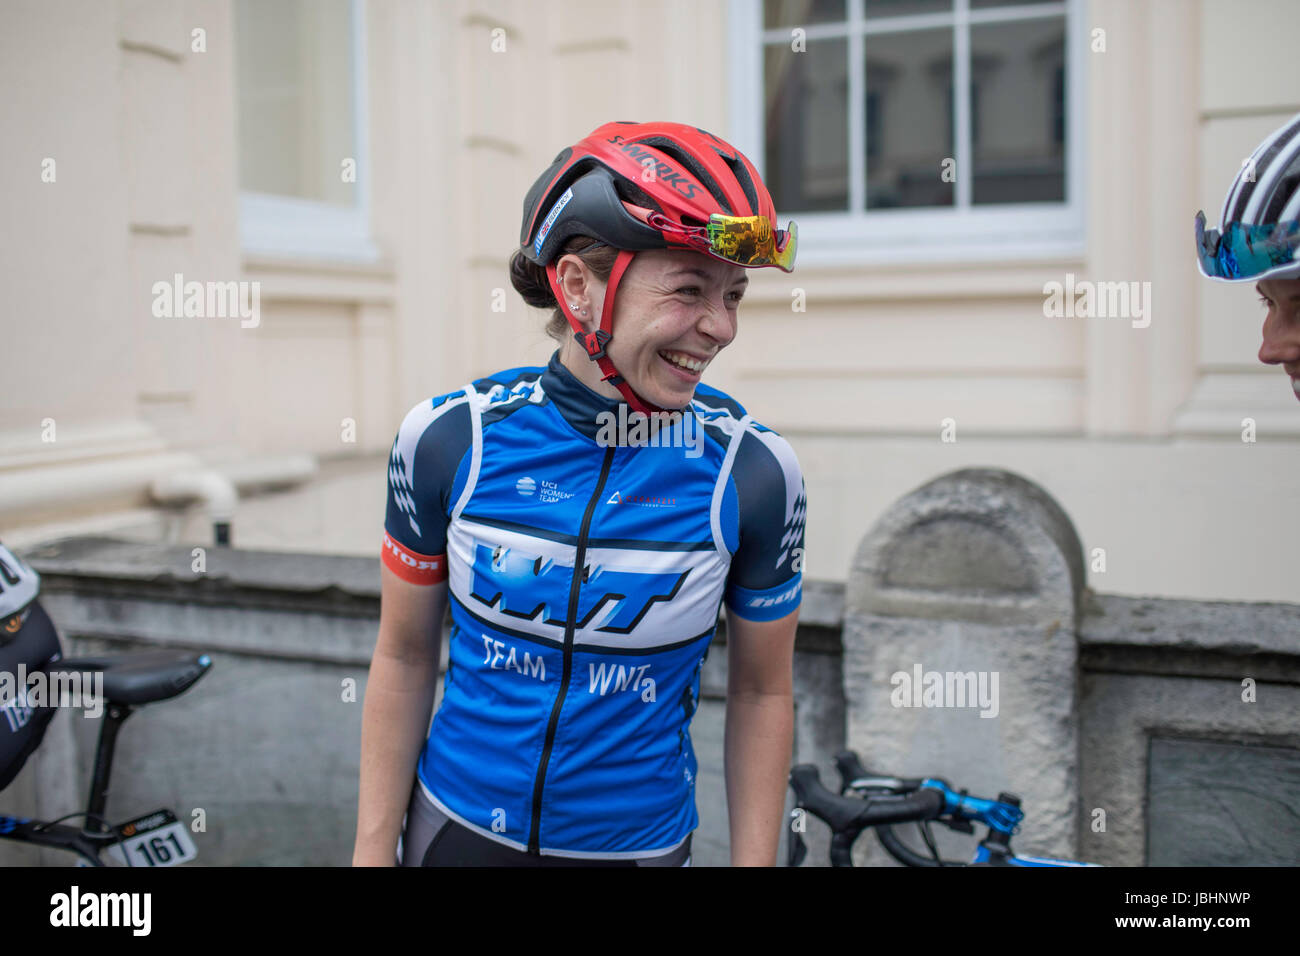 London, UK.  11th June 2017. Final stage of the 2017 Women’s Tour of Britain. Eileen Roe before the race. Credit: Neville Styles/Alamy Live News Stock Photo